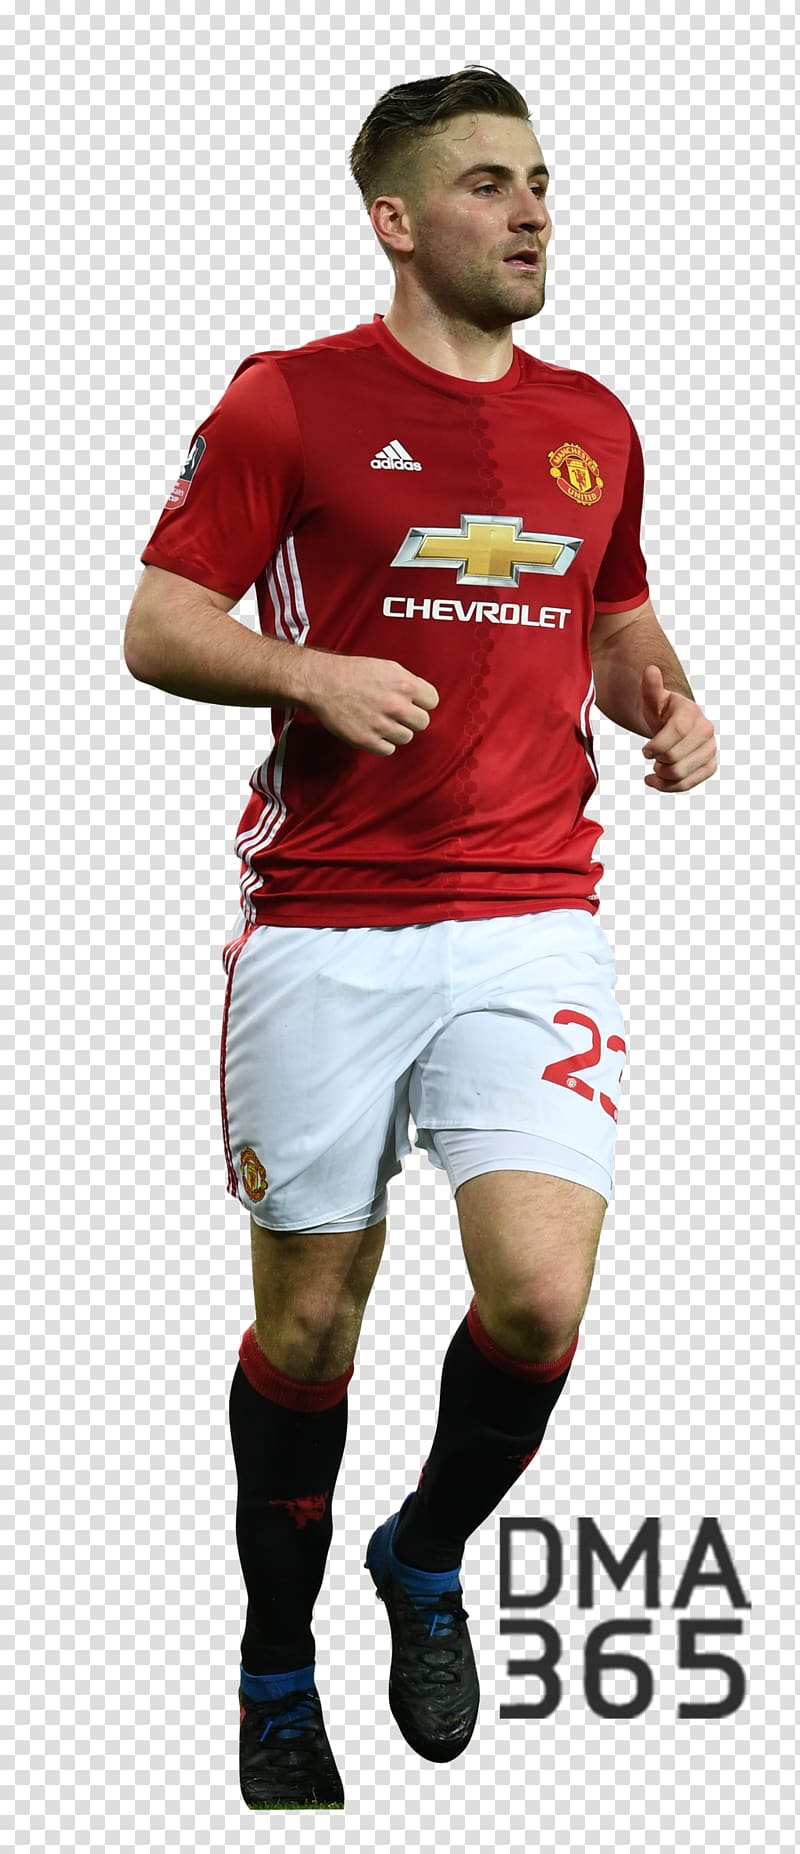 Luke Shaw Jersey Football player, ANTHONY Martial transparent background PNG clipart